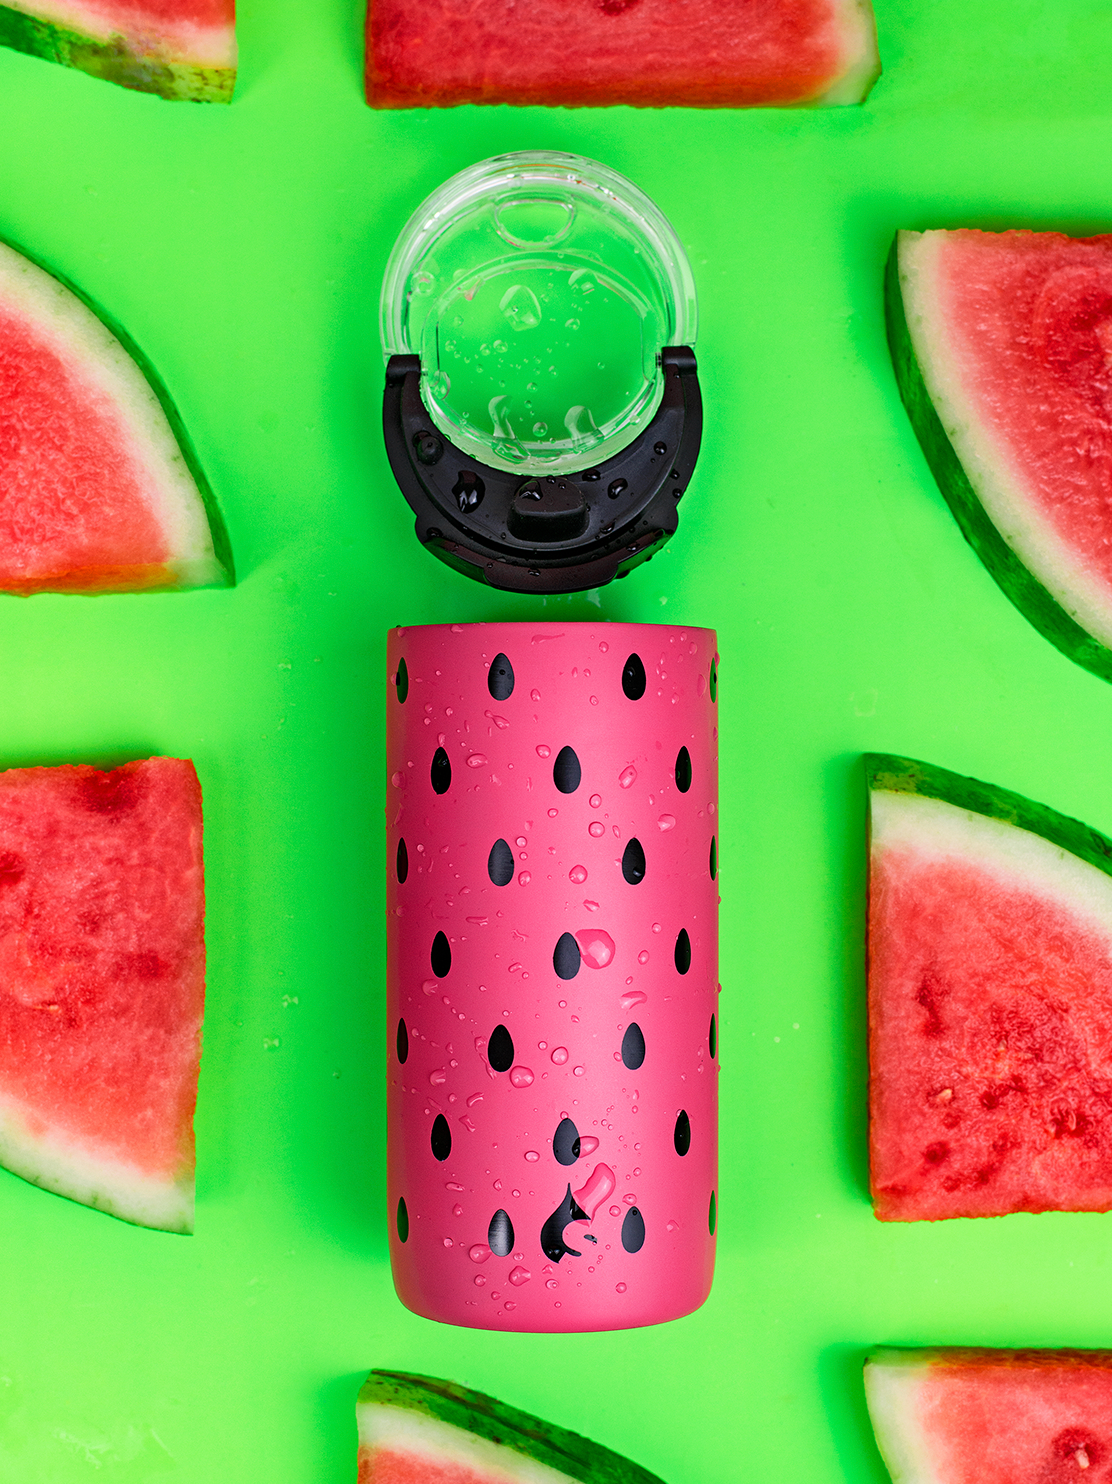 Watermelon 2 in 1 Sully Stainless Steel Drinking Bottles - 20 oz - Sully Innovations 